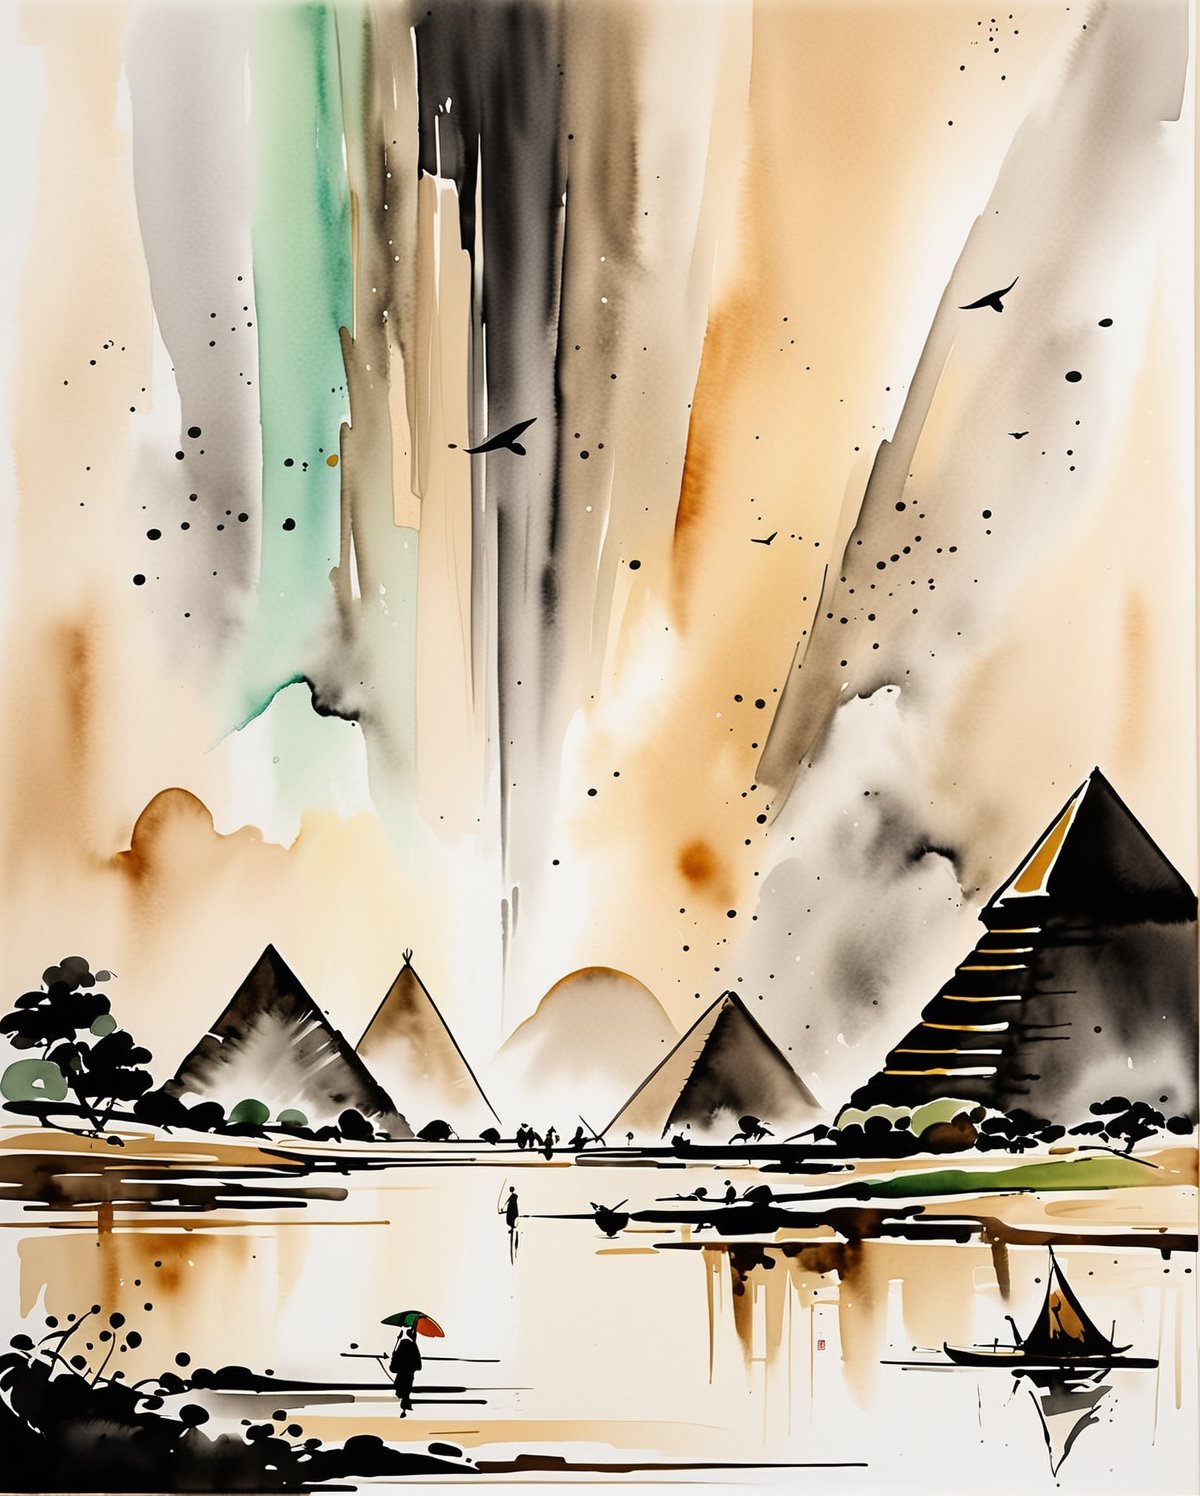 A captivating fusion of Chinese ink wash technique and the stylistic elements of Wu Guanzhong. The iconic silhouette of the Egyptian pyramids is rendered with harmonious fluidity and expressiveness, capturing the essence of these ancient structures. The painting incorporates Western painting concepts like perspective and light, adding depth and realism to the scene. The final result is a mesmerizing visual narrative that transcends cultural boundaries and celebrates the universal appeal of artistic expression.